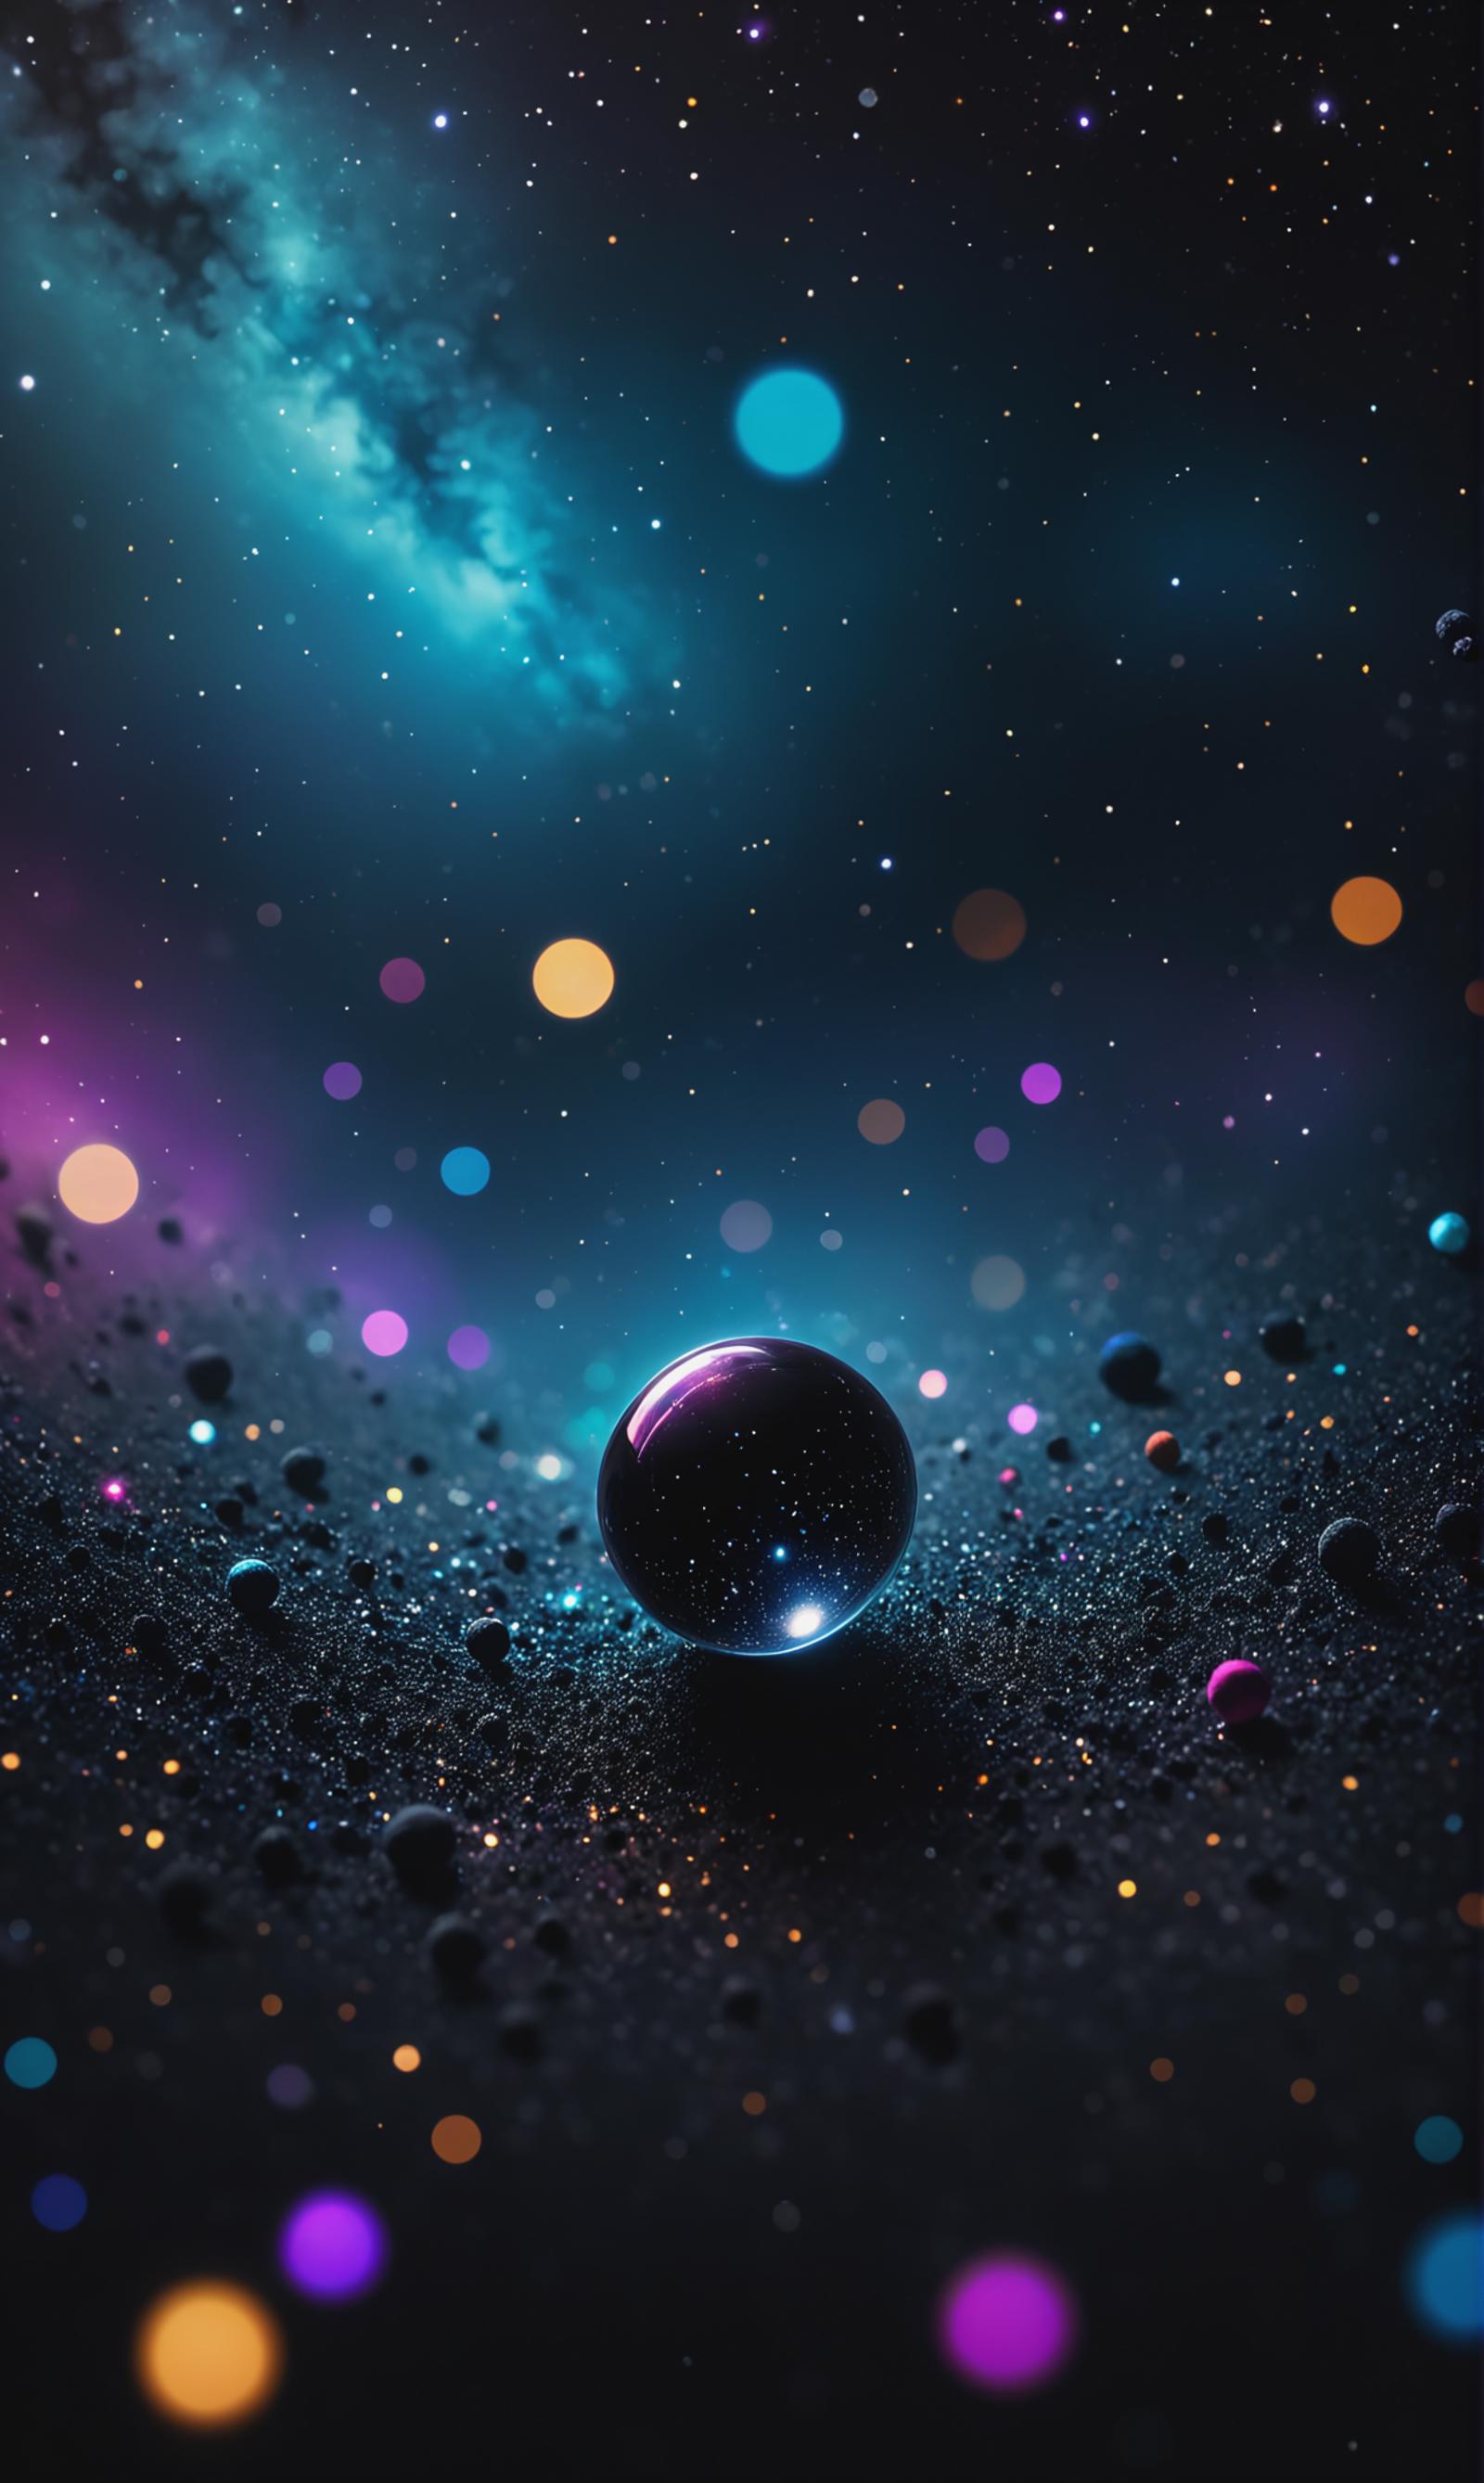 A neon and purple galaxy with a black background and a large purple sphere.